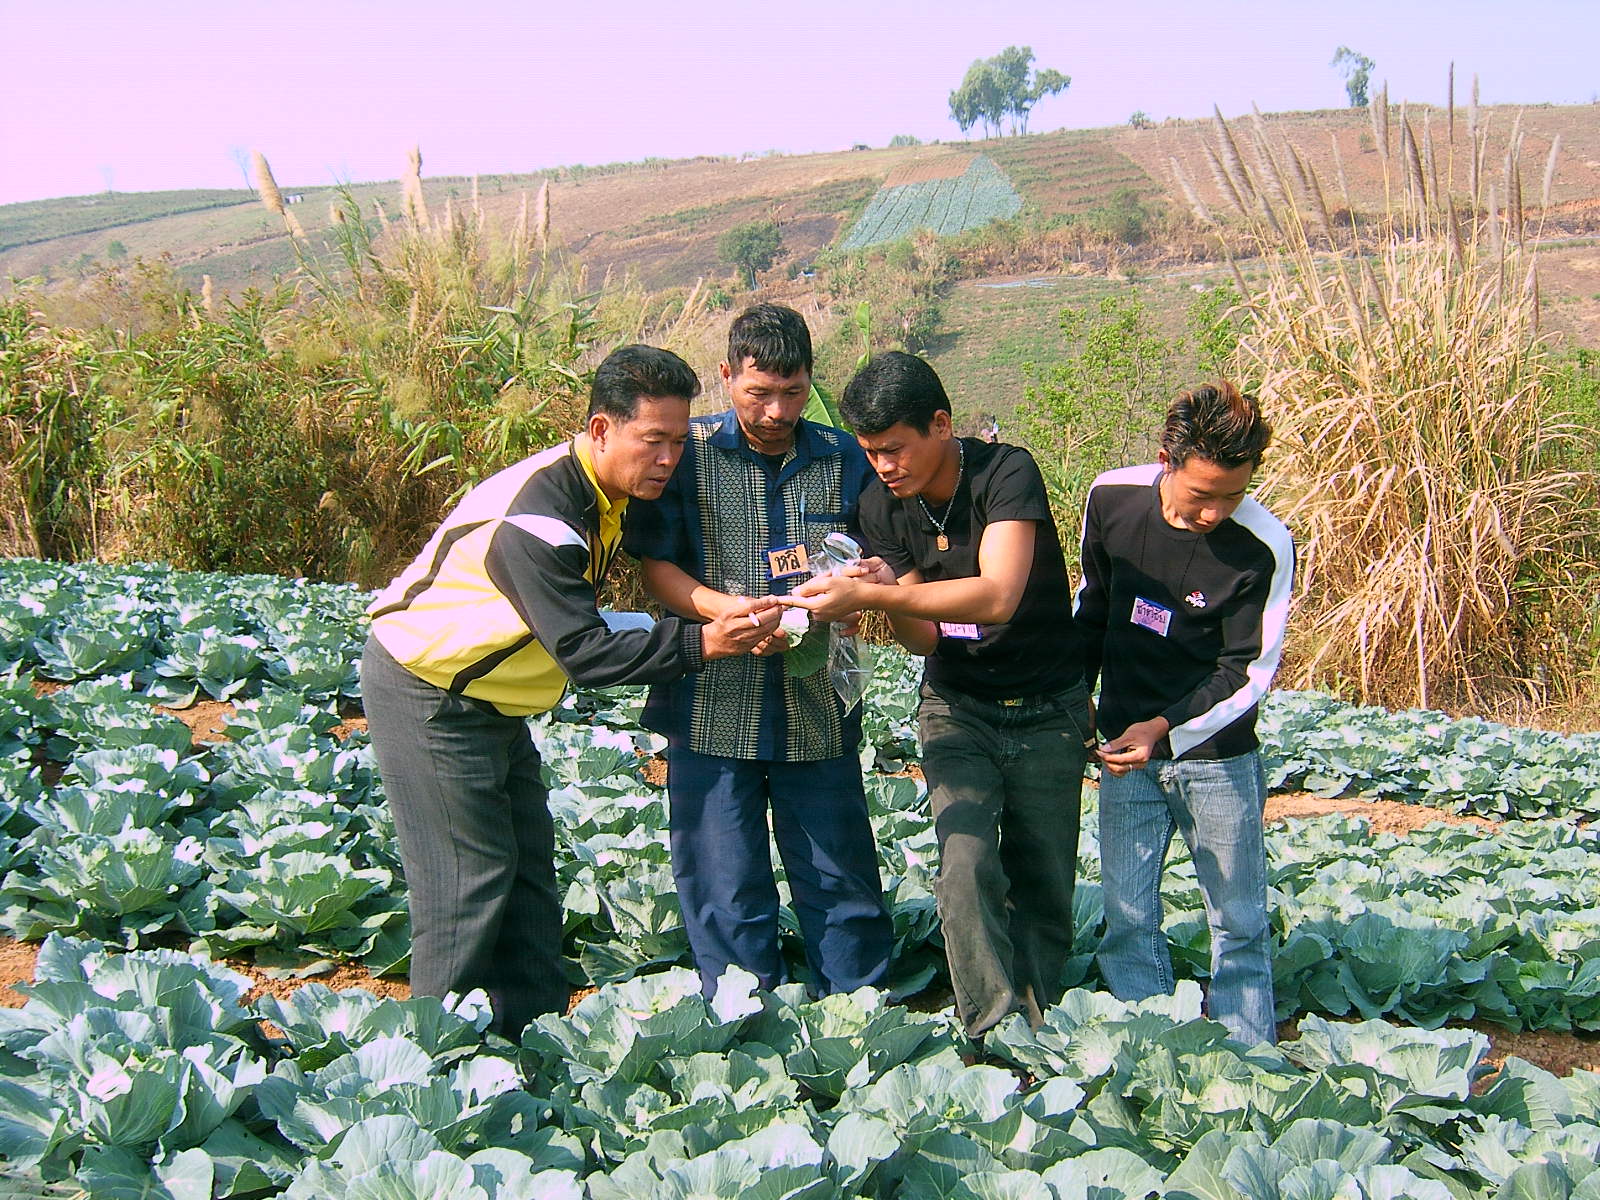 Farmers learn from each other at a field school in Thailand. Credit: Agricultural Extension in South Asia AESA